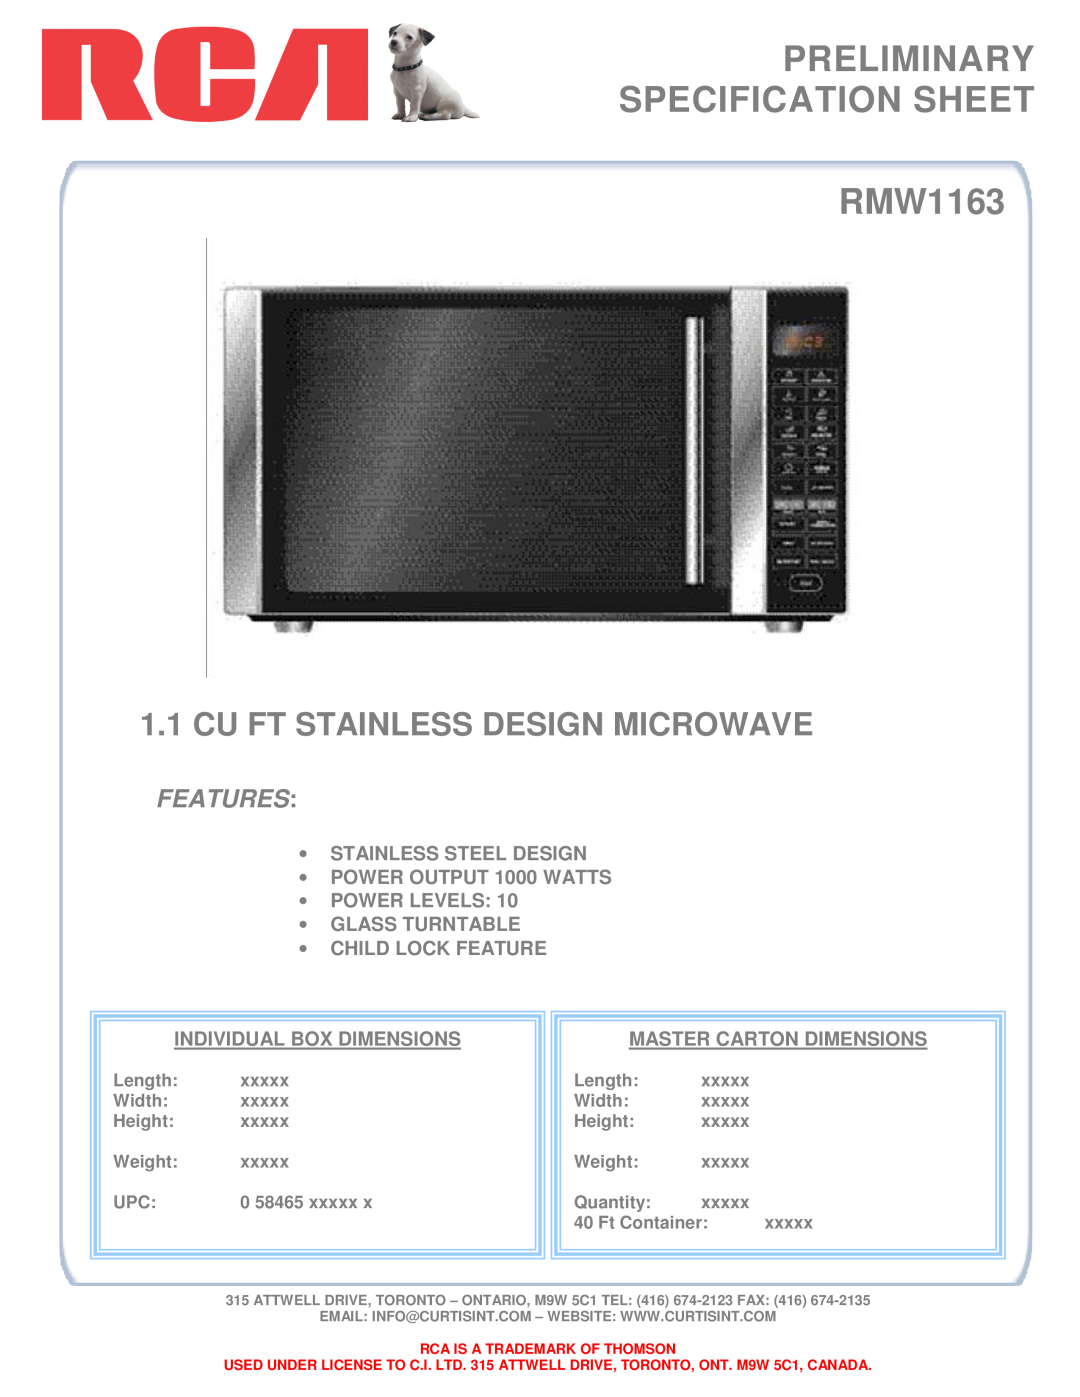 RCA specifications PRELIMINARY SPECIFICATION SHEET RMW1163, Cu Ft Stainless Design Microwave, Features 